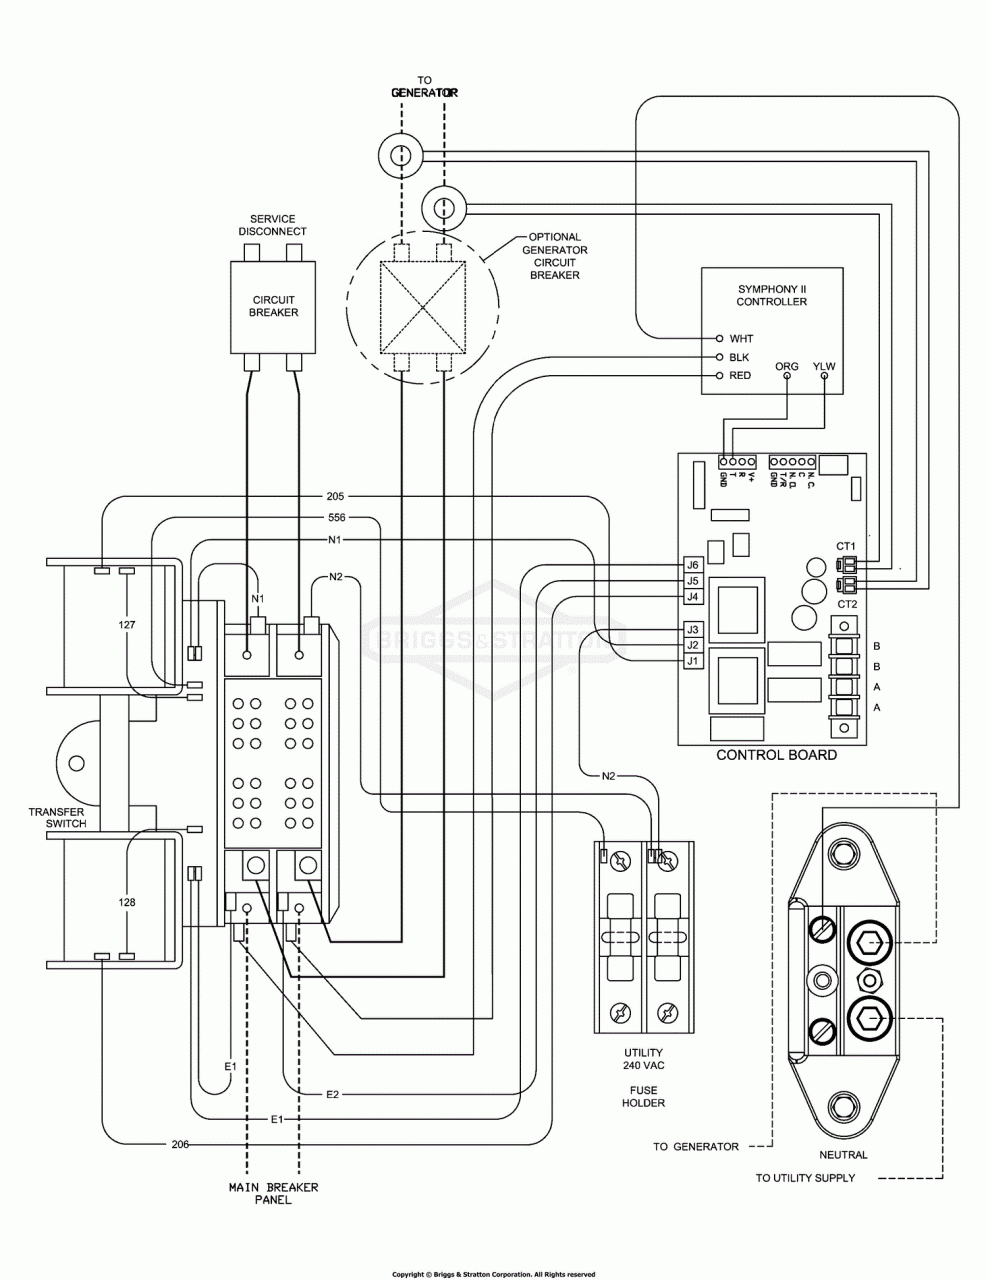 200 amp automatic transfer switch installation Wiring Diagram and